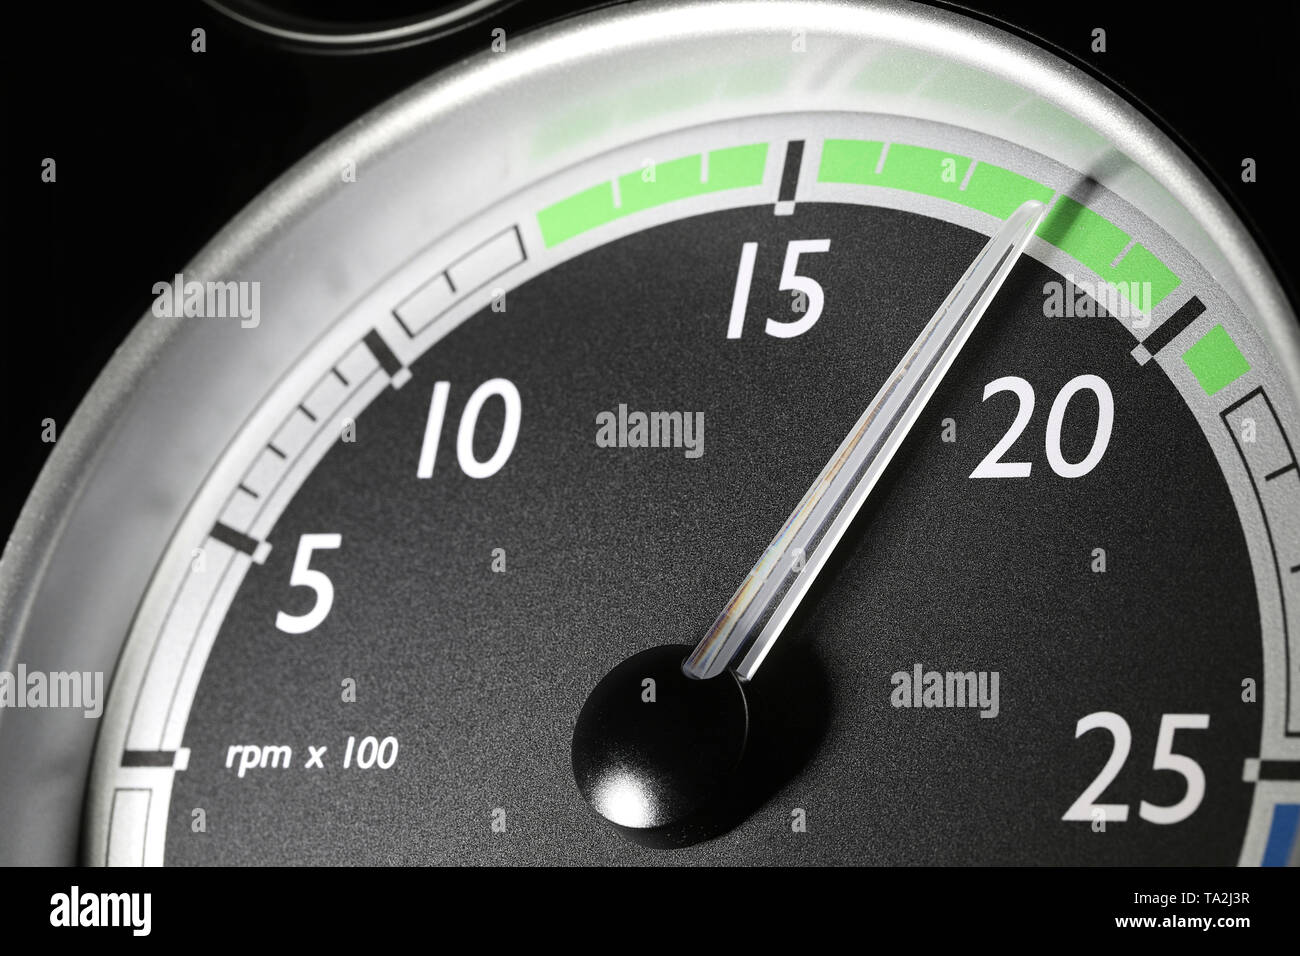 tachometer of a truck at economic mode of operation Stock Photo